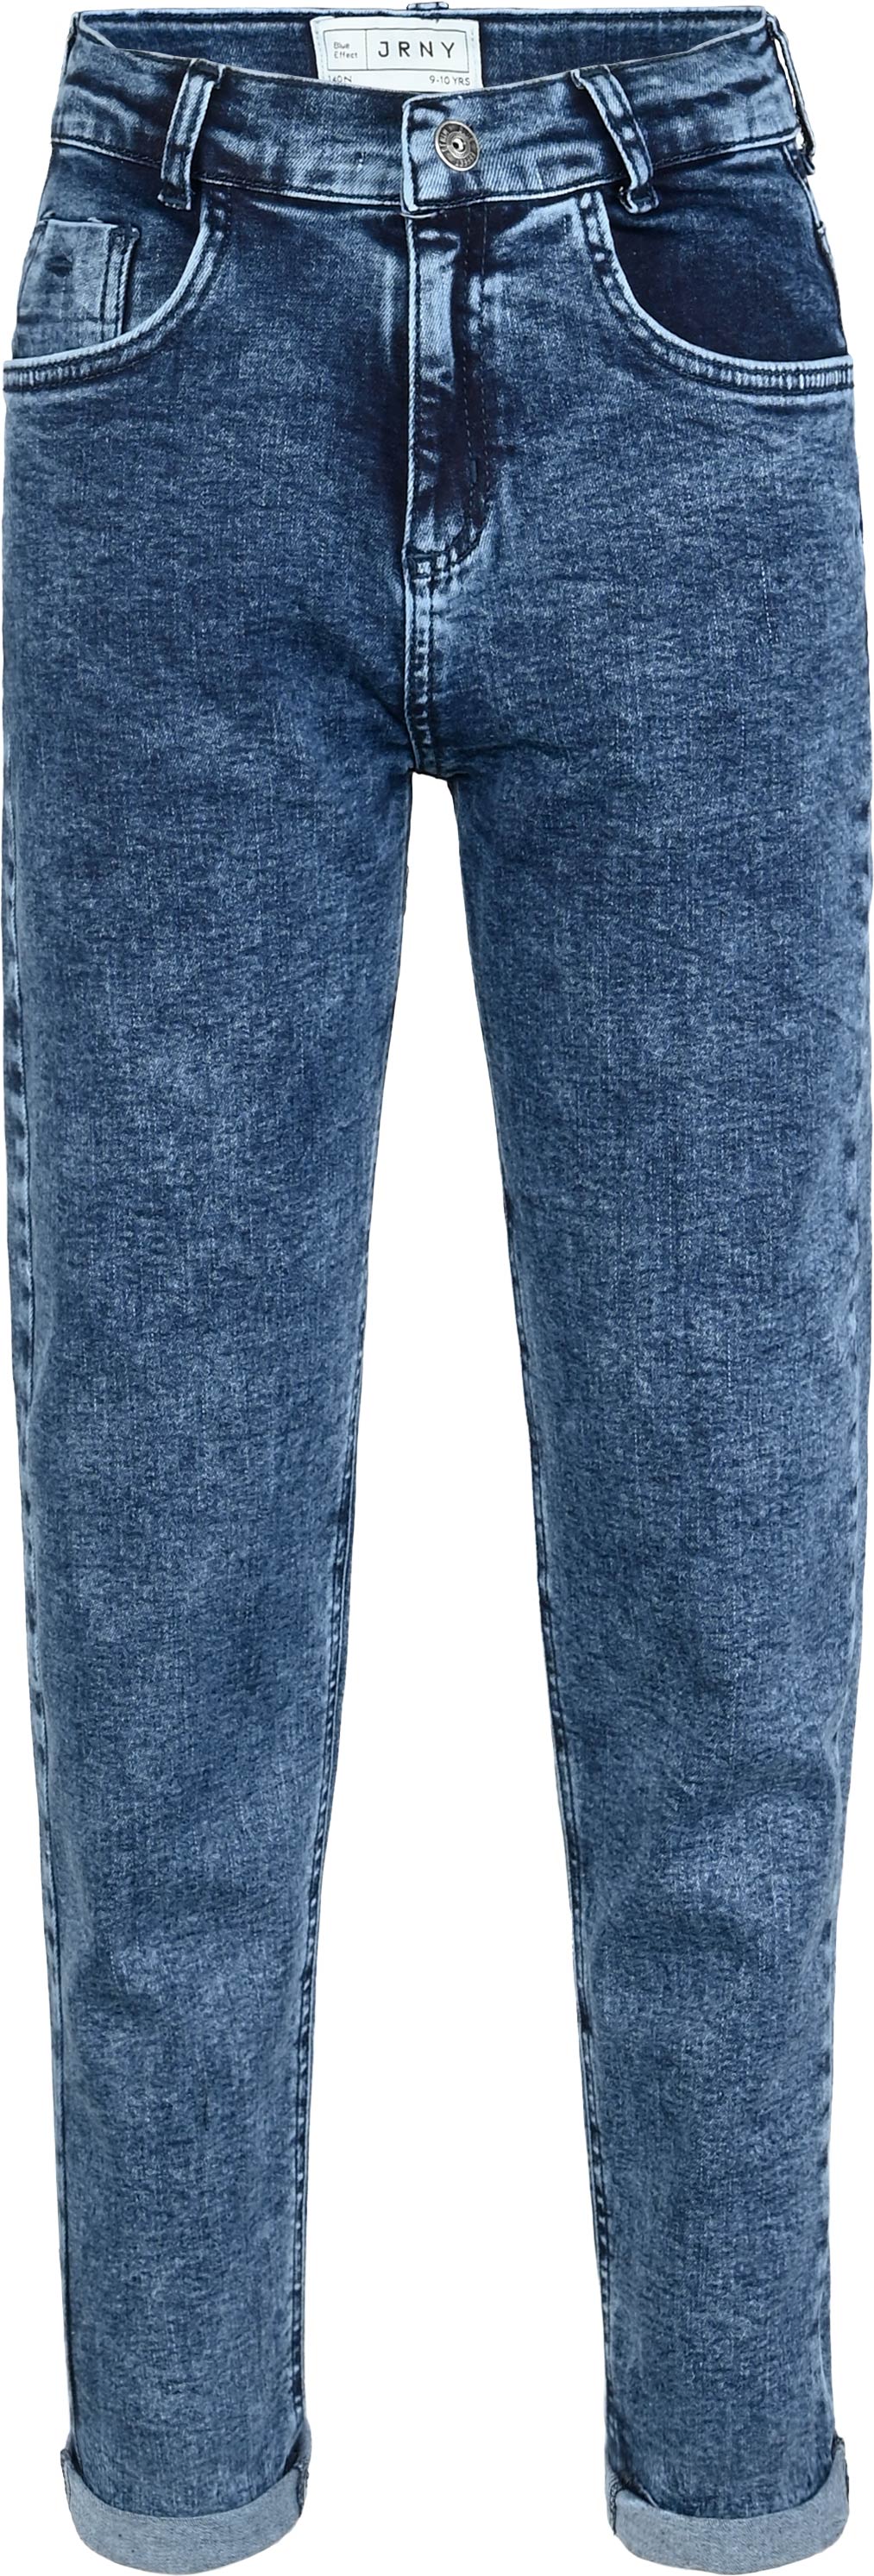 1400-JRNY Balloon Fit Jeans Girls, Cropped, verfügbar in Normal